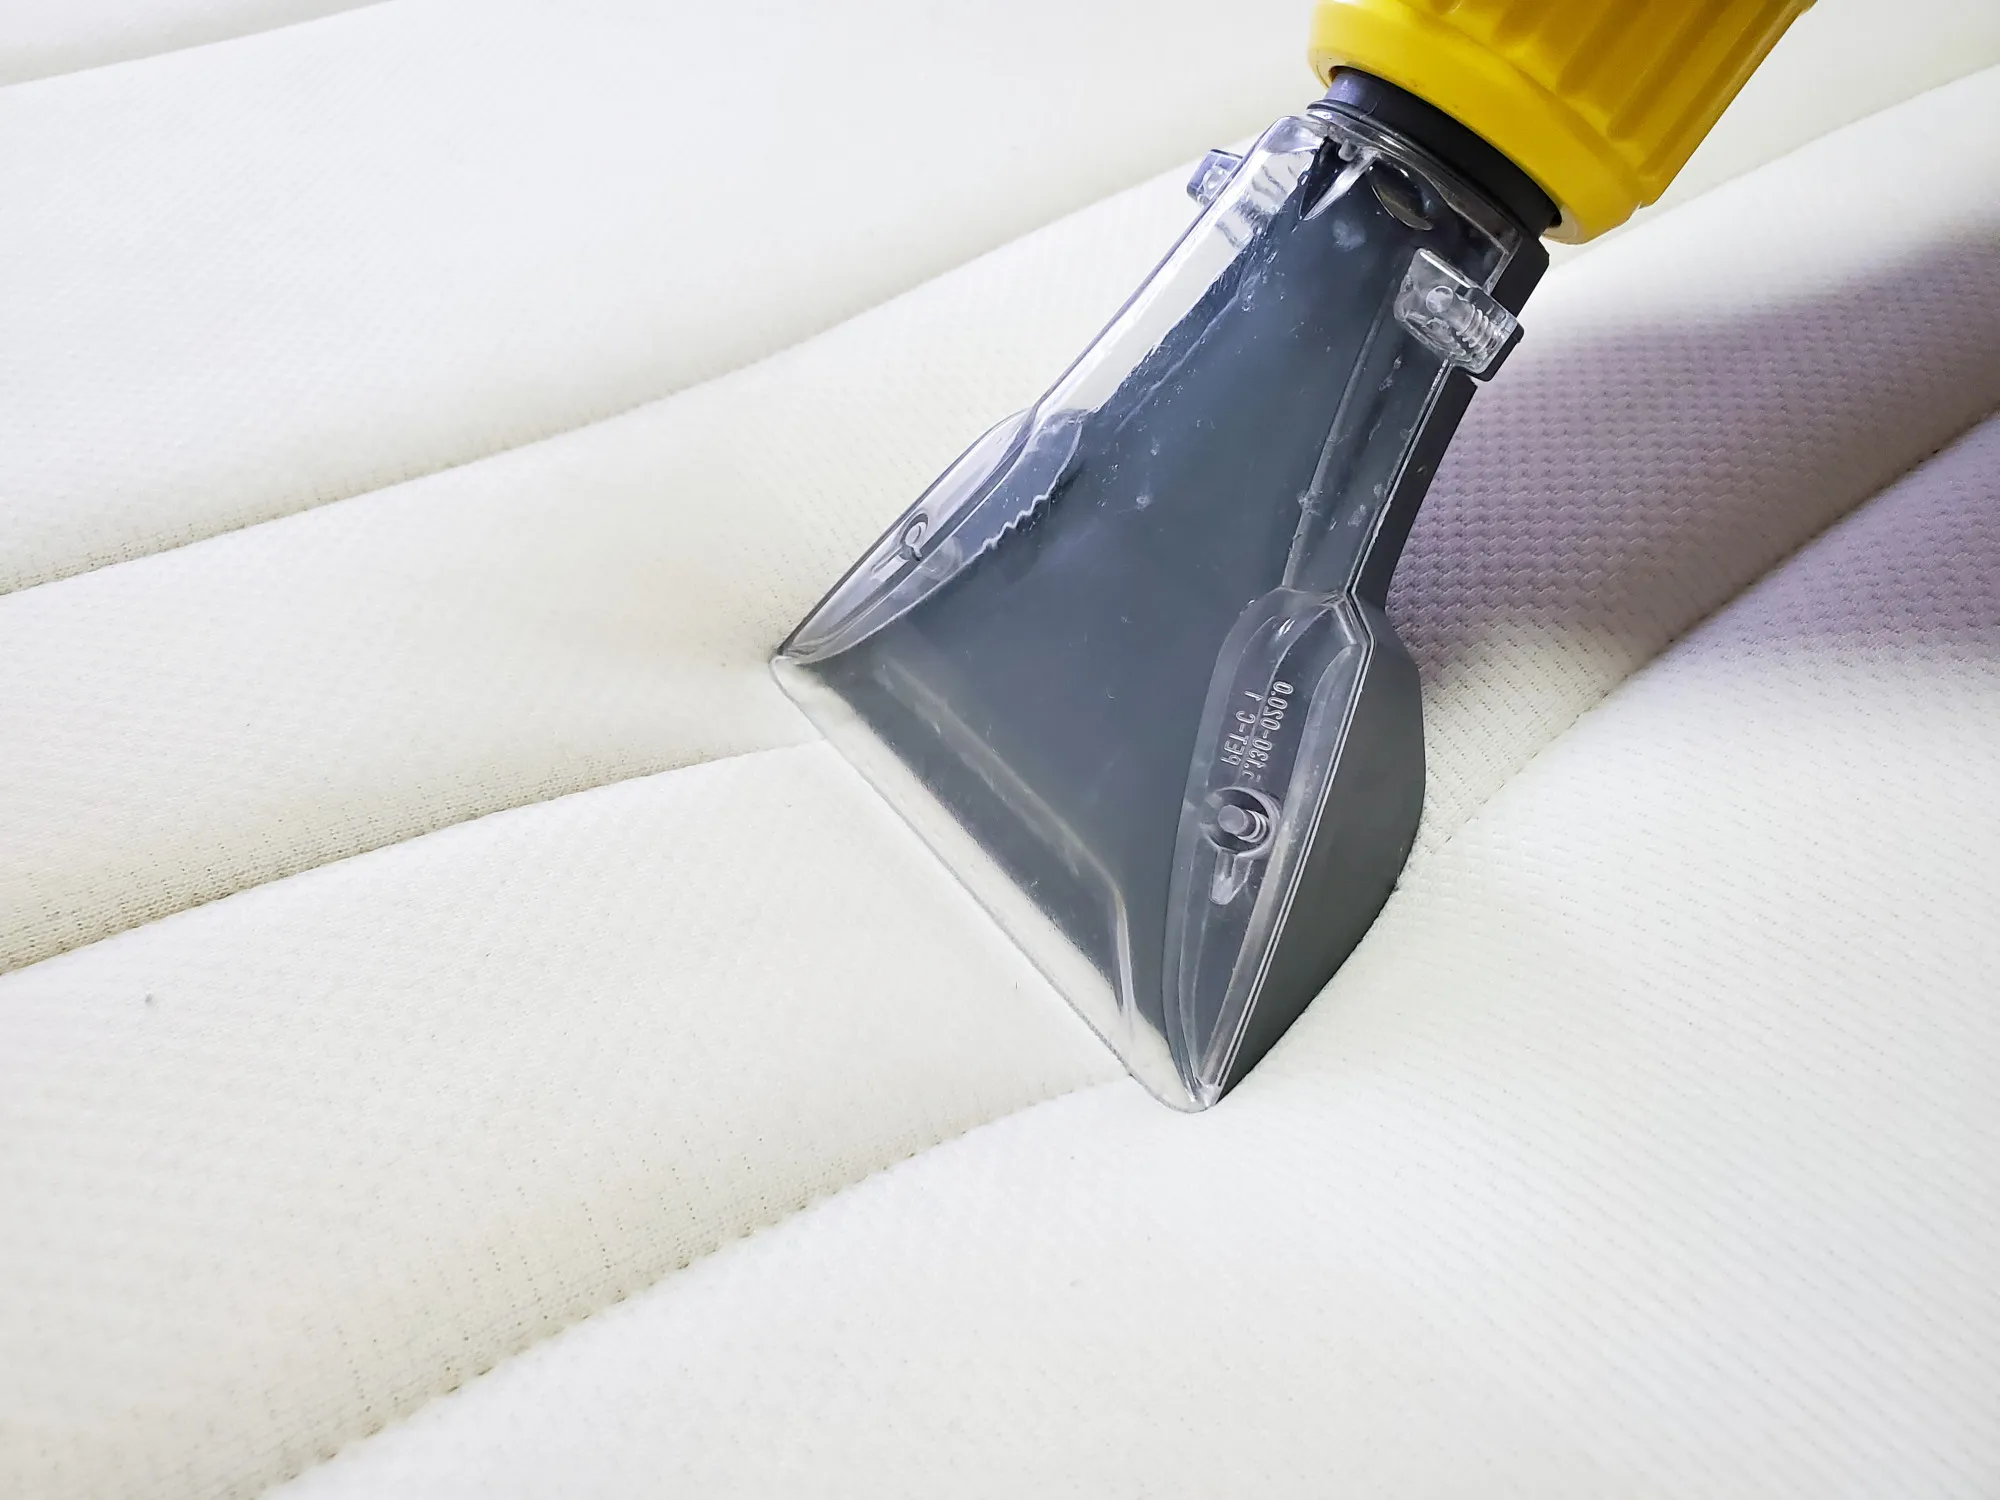 Mattress Cleaning Services in New Westminster, BC